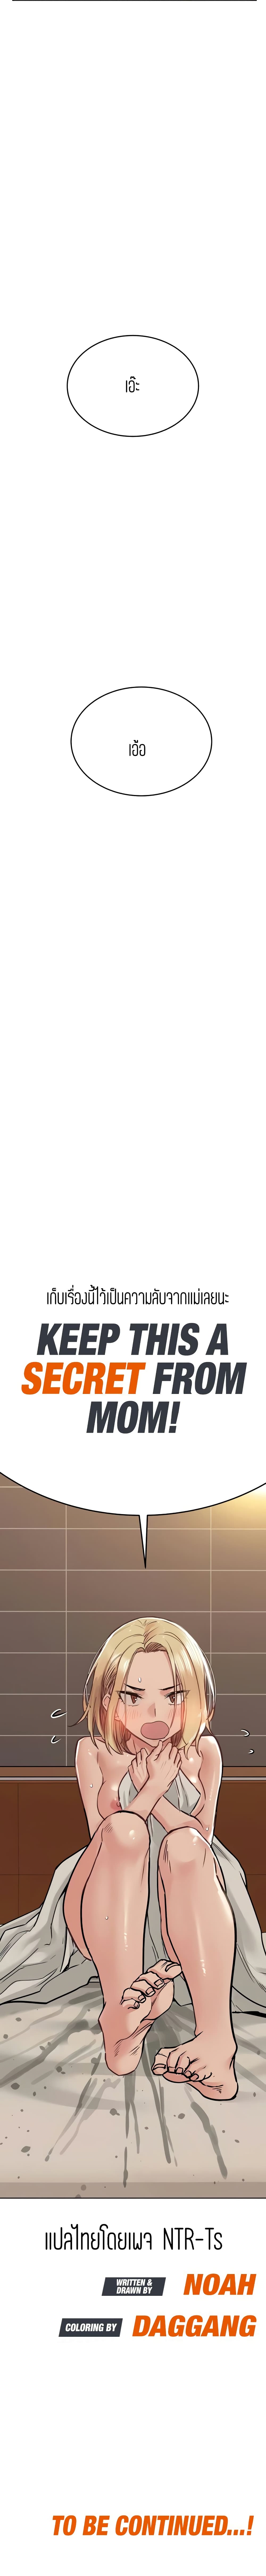 Keep it A Secret from Your Mother! 24-24